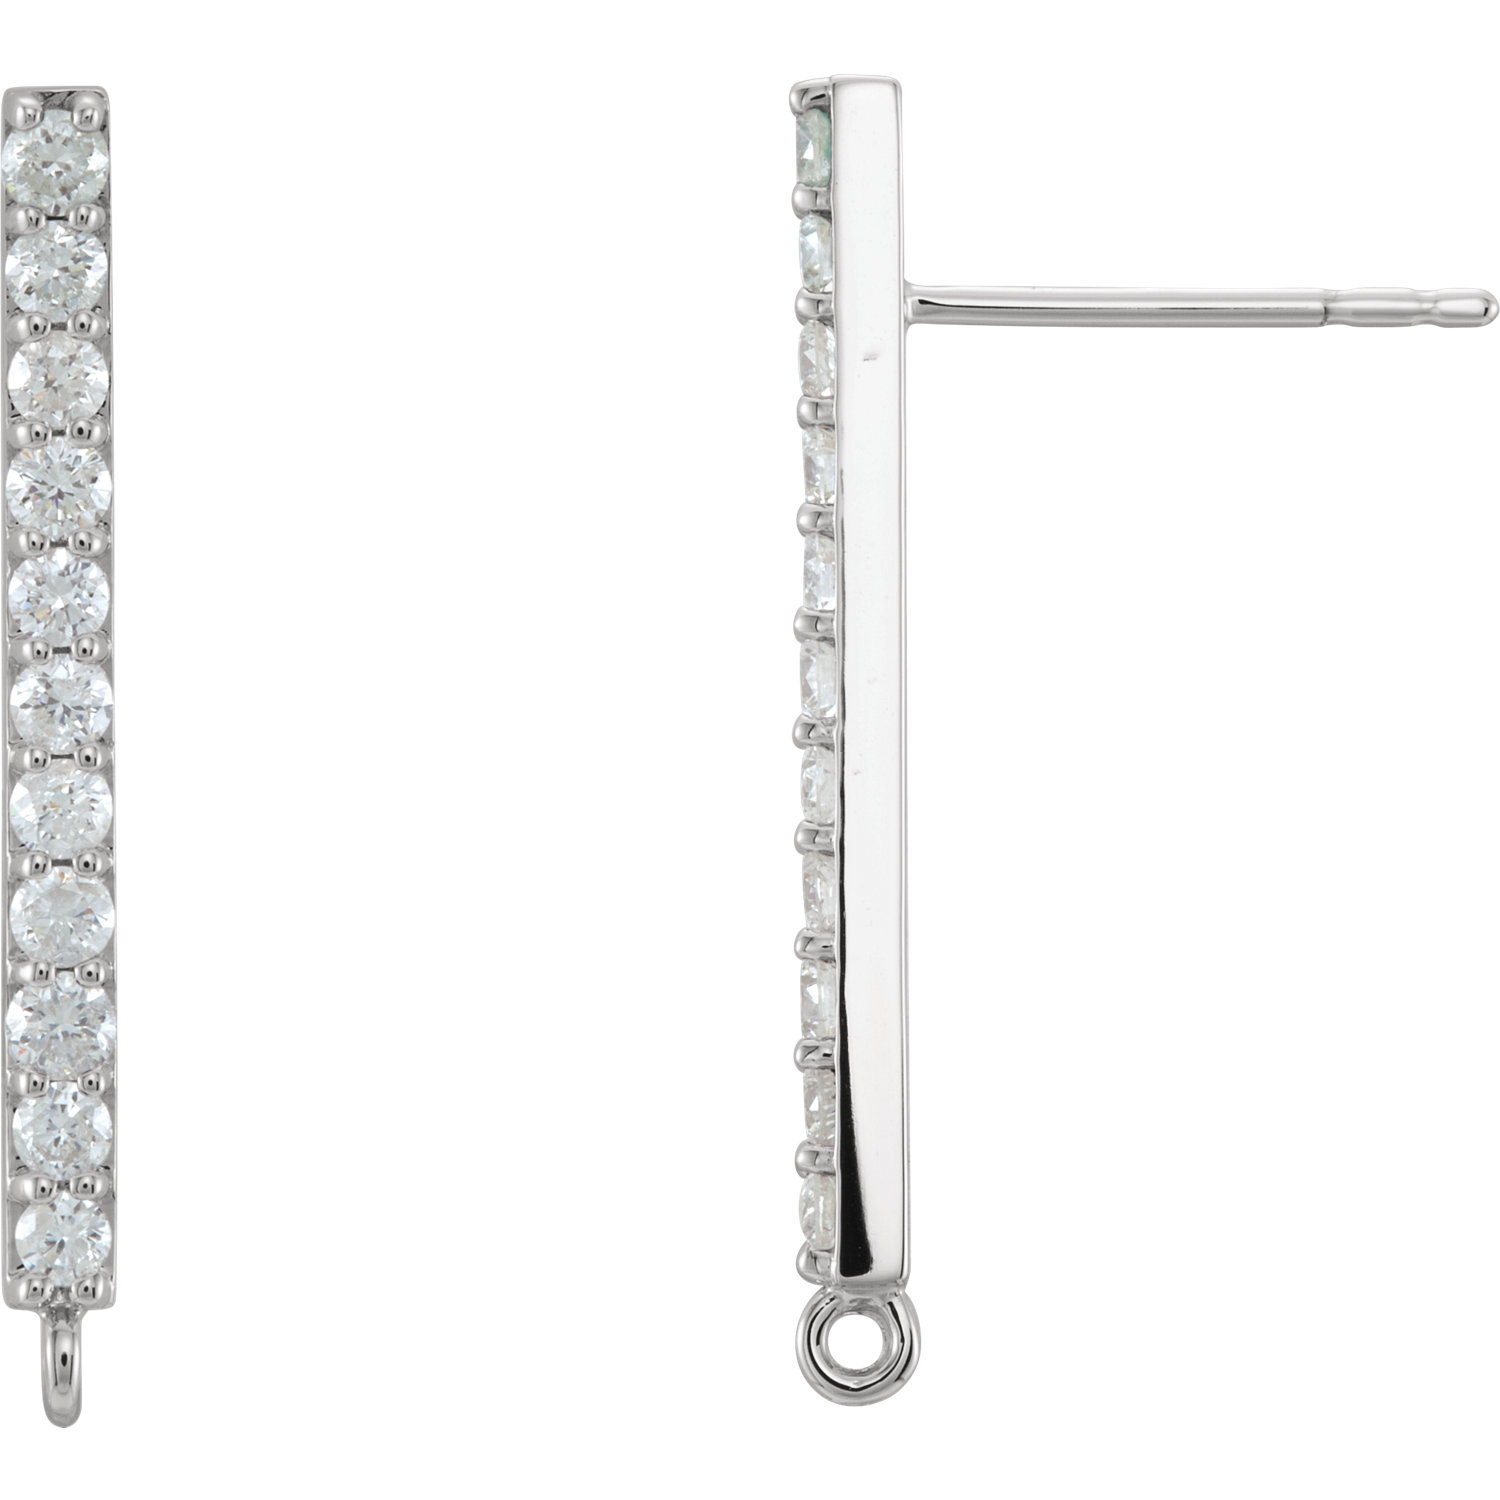 14K White 1/2 CTW Diamond Accented Bar Earrings with Jump Rings.